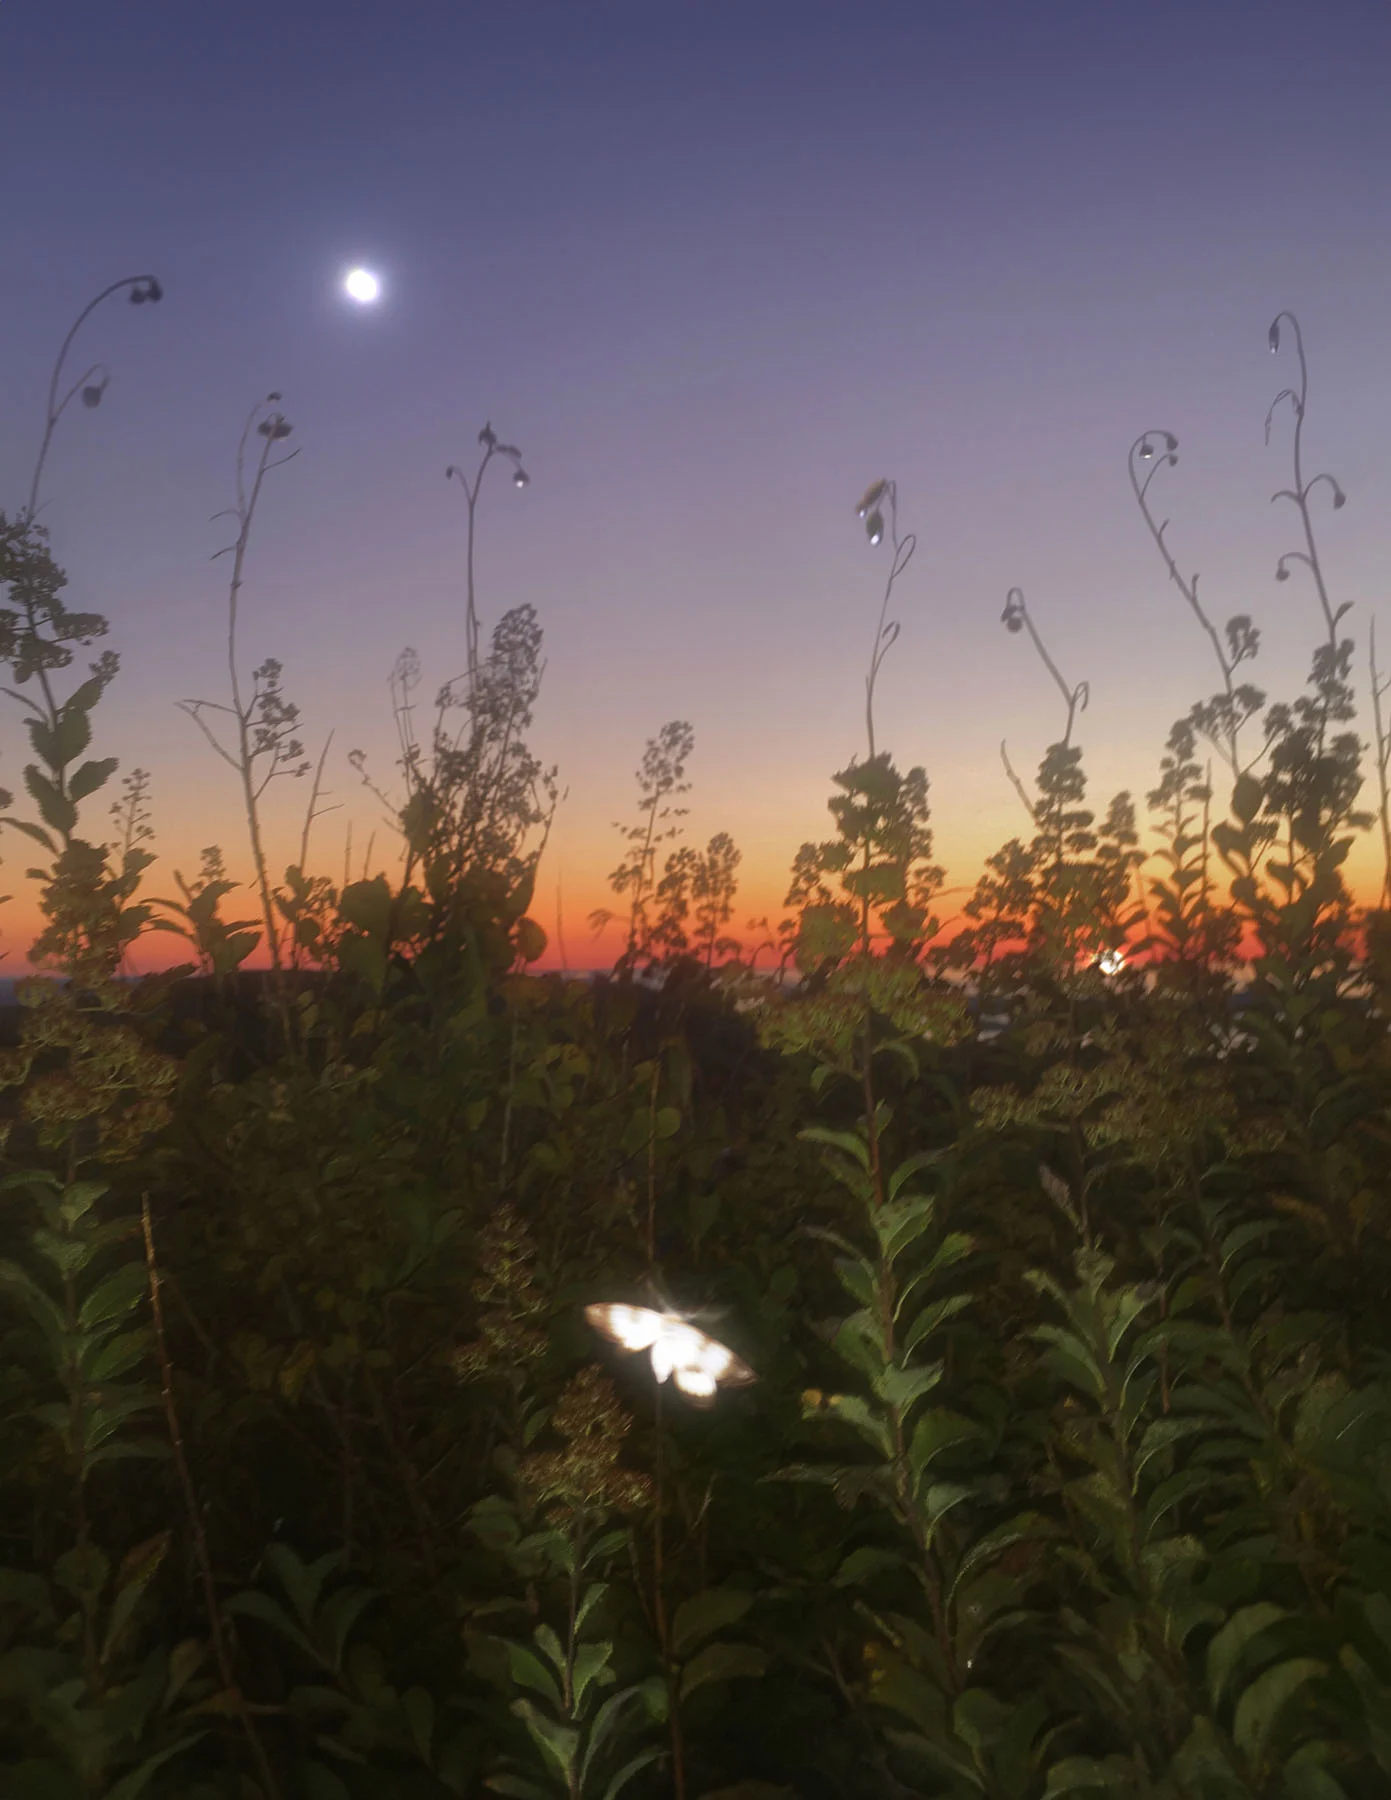 A photograph of a fantastical green meadow at sunset. The moon rises above the dew-covered scene, with a single moth caught by the camera flash at the forefront of the composition. 